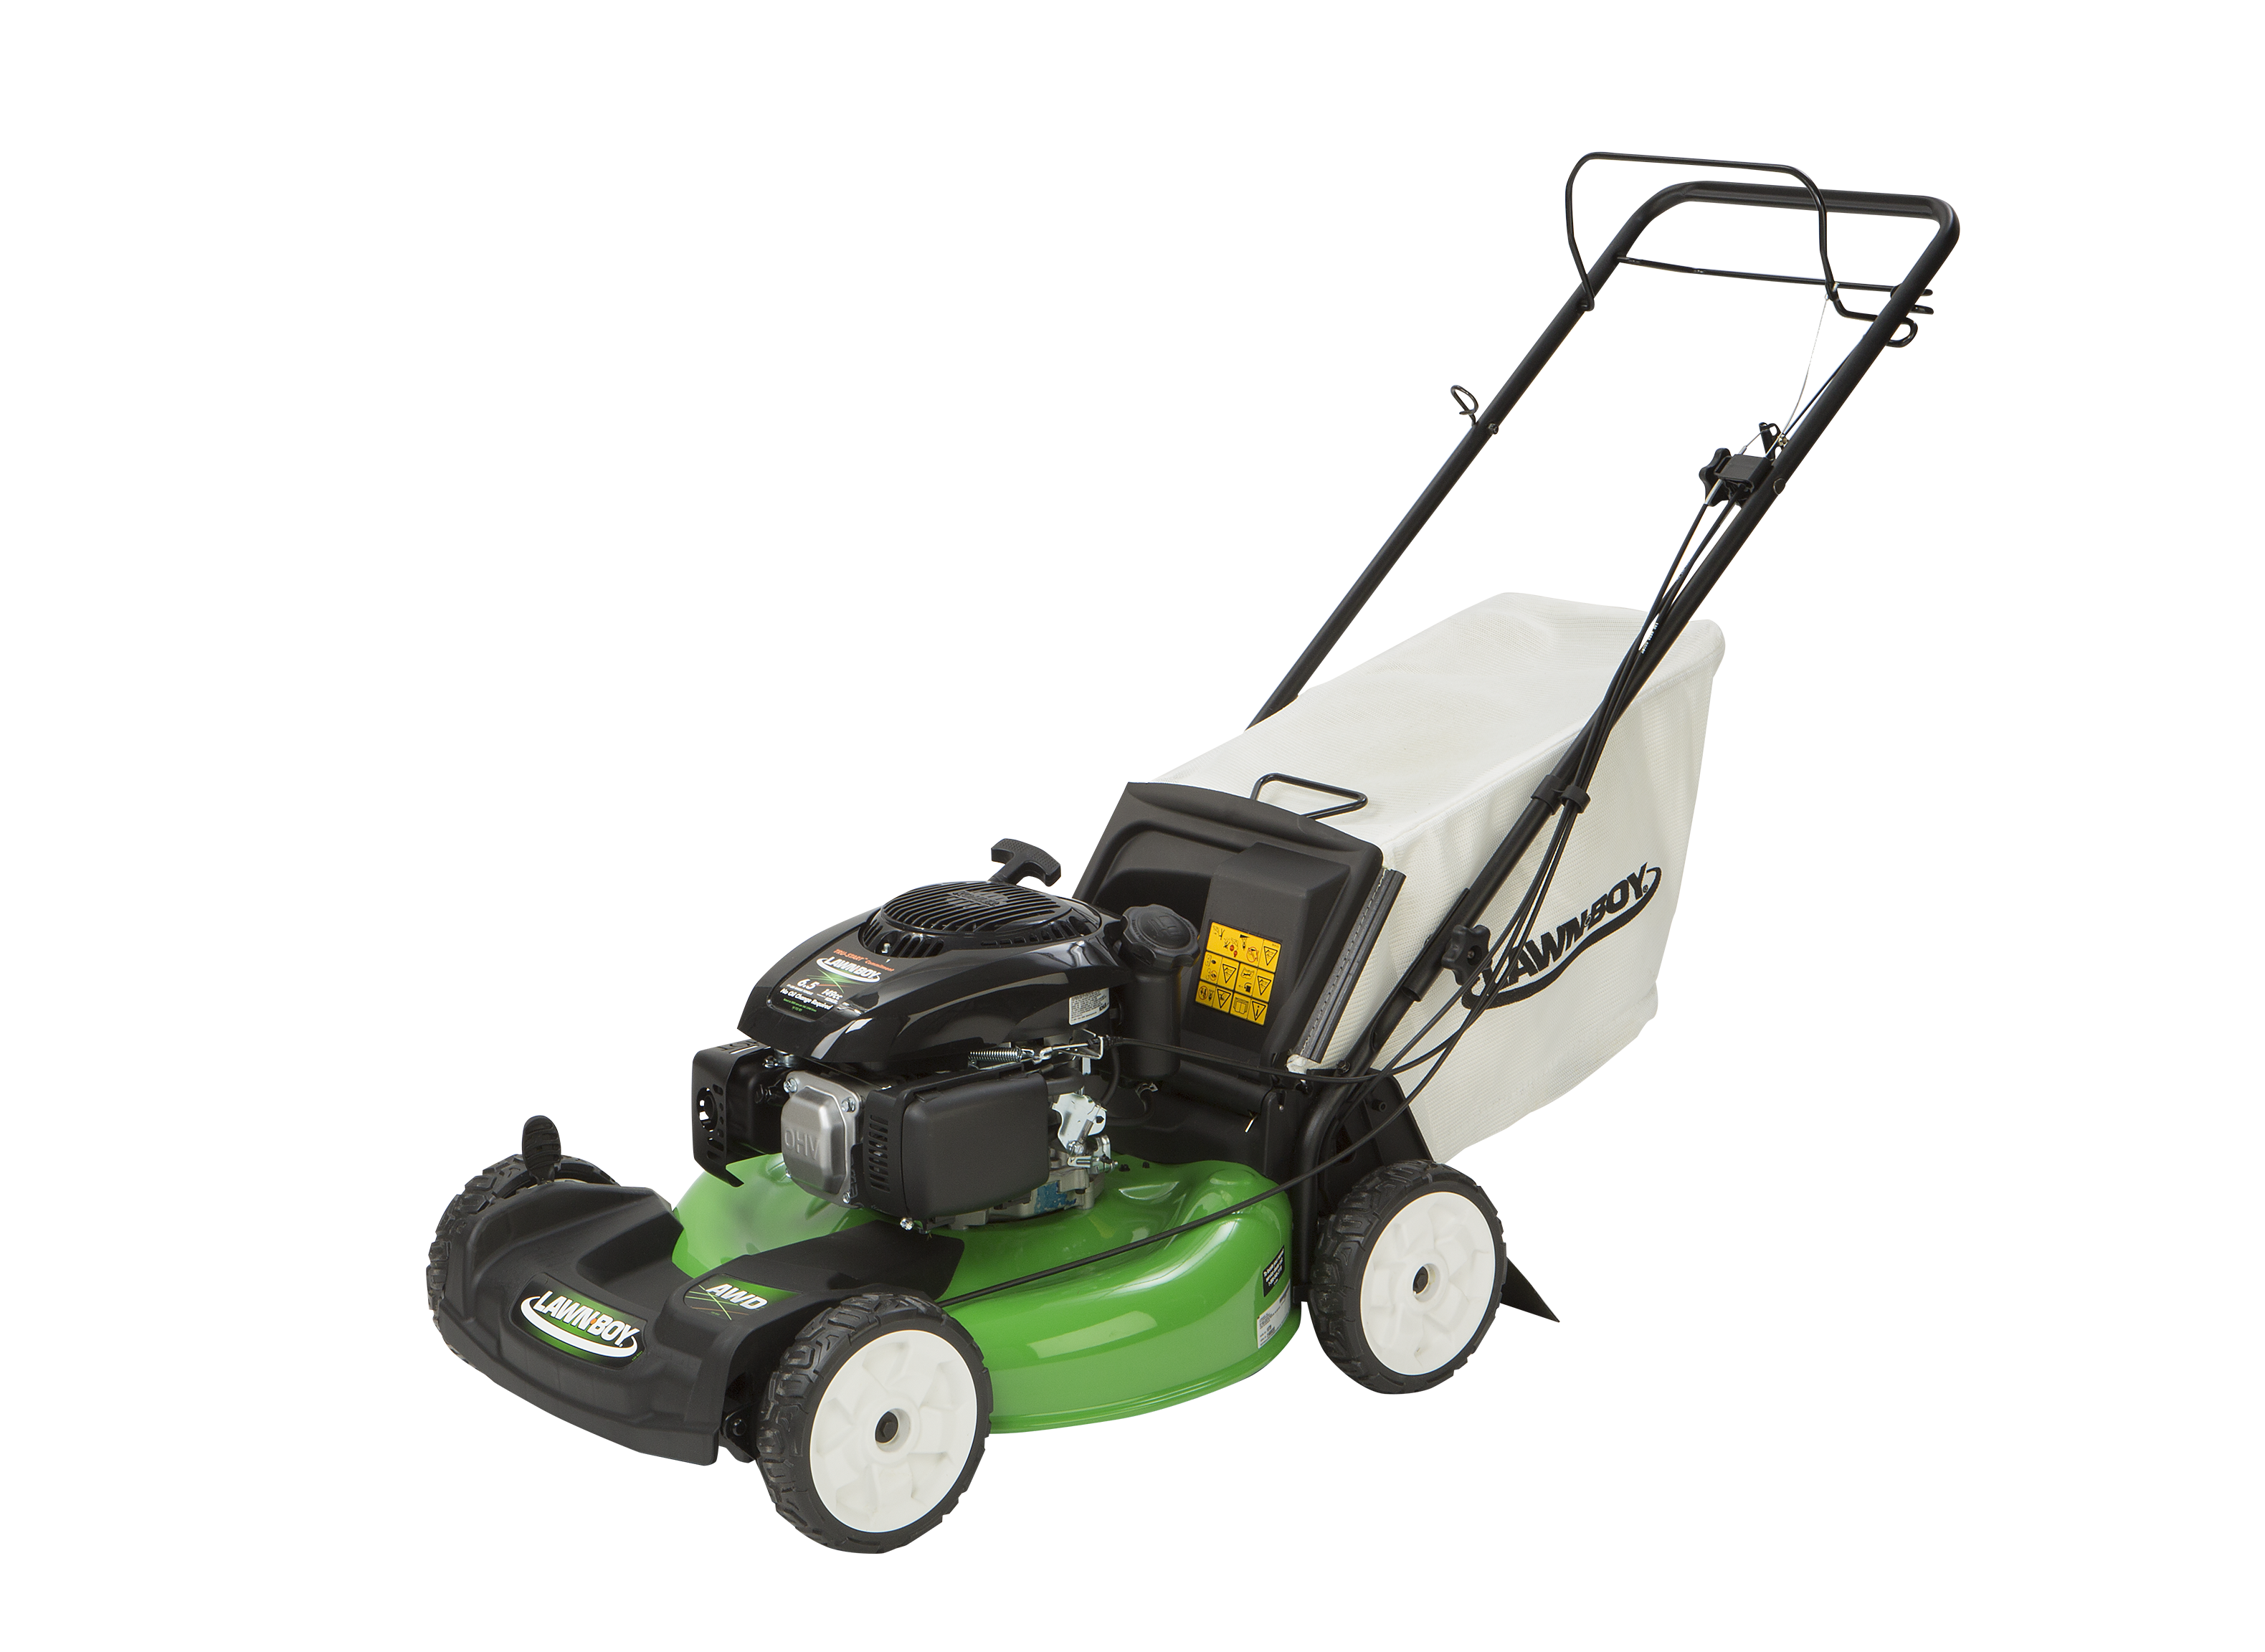 Lawn-Boy Landscaping Equipment Lawn Mowers, BlowerVacs And